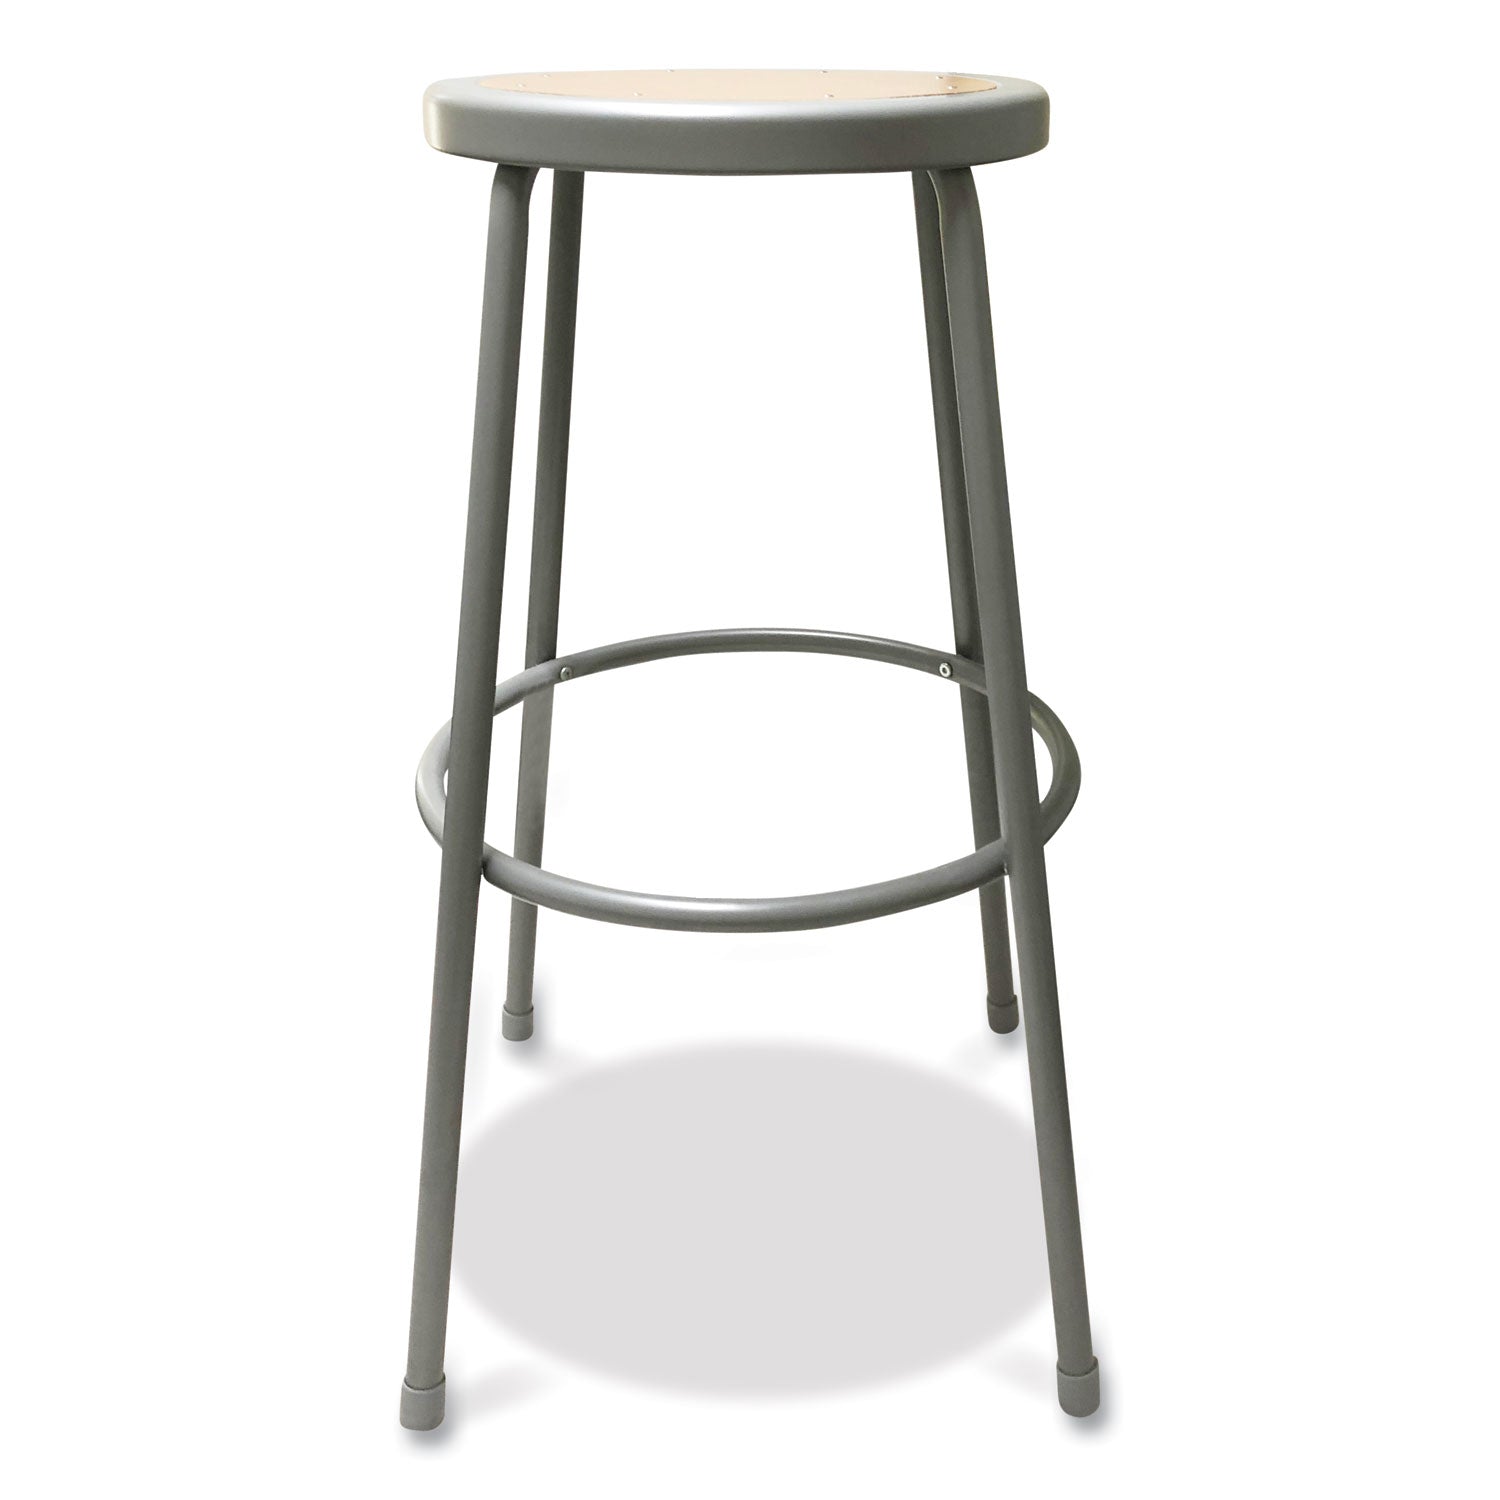 industrial-metal-shop-stool-backless-supports-up-to-300-lb-30-seat-height-brown-seat-gray-base_aleis6630g - 1